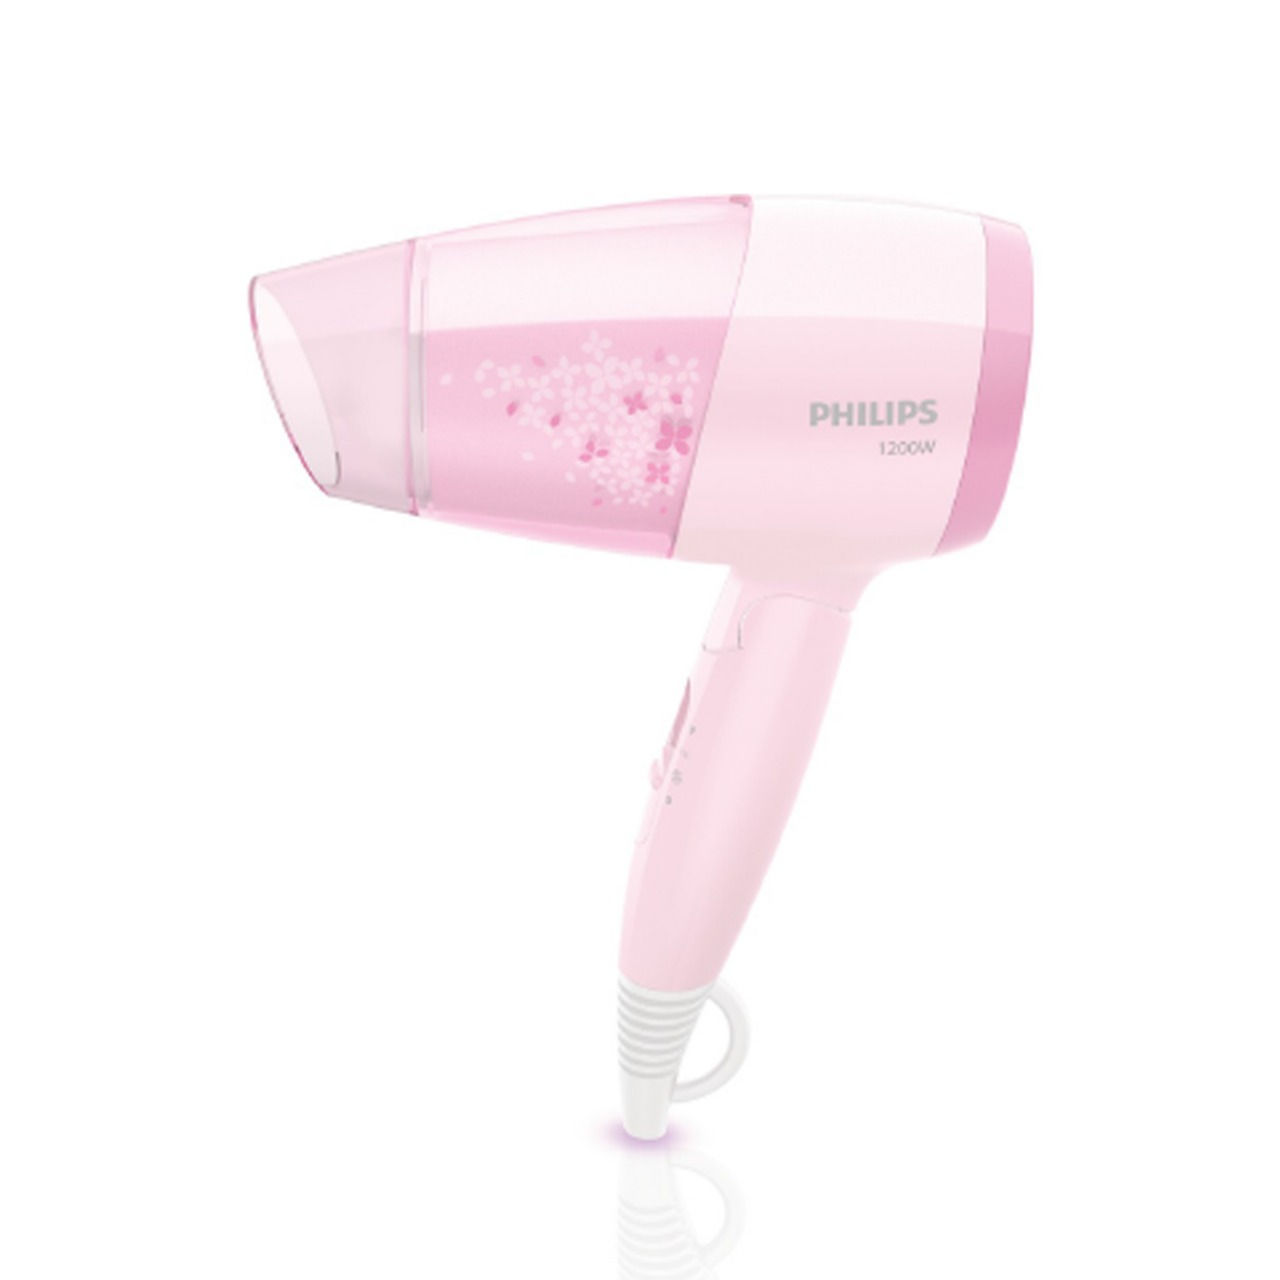 Philips Hair Dryer ThermoProtect 1200W with Air Concentrator + Diffuser attachment (BHC017/00)